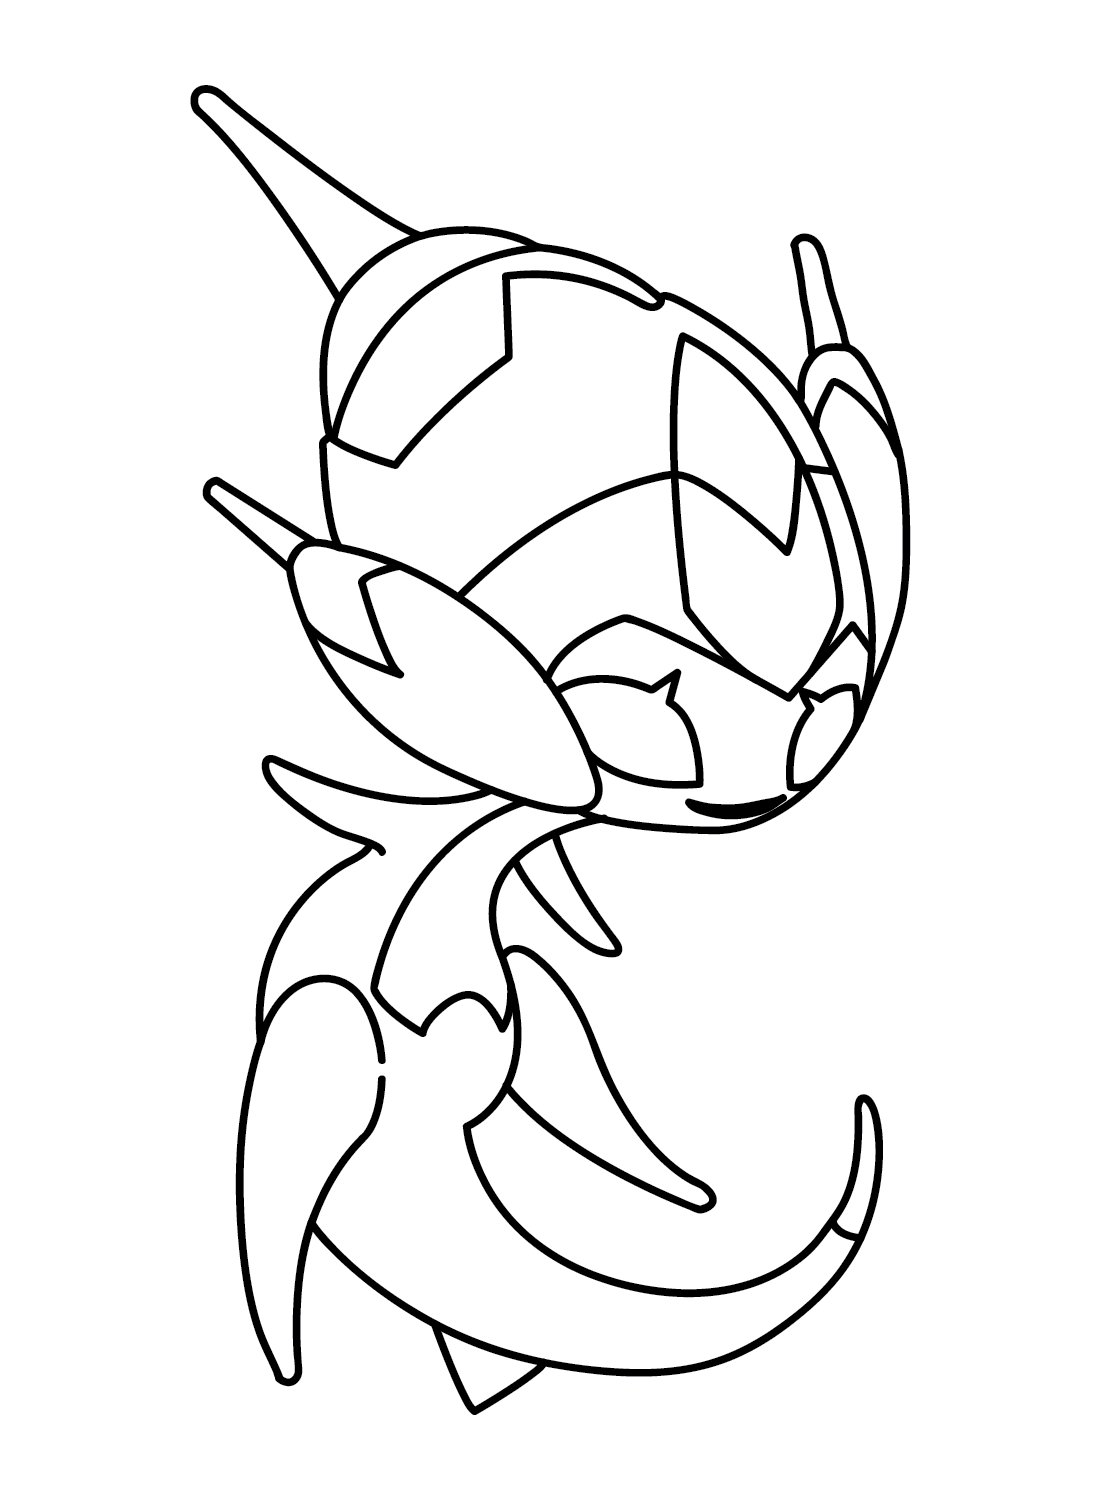 Poipole Color Coloring Page